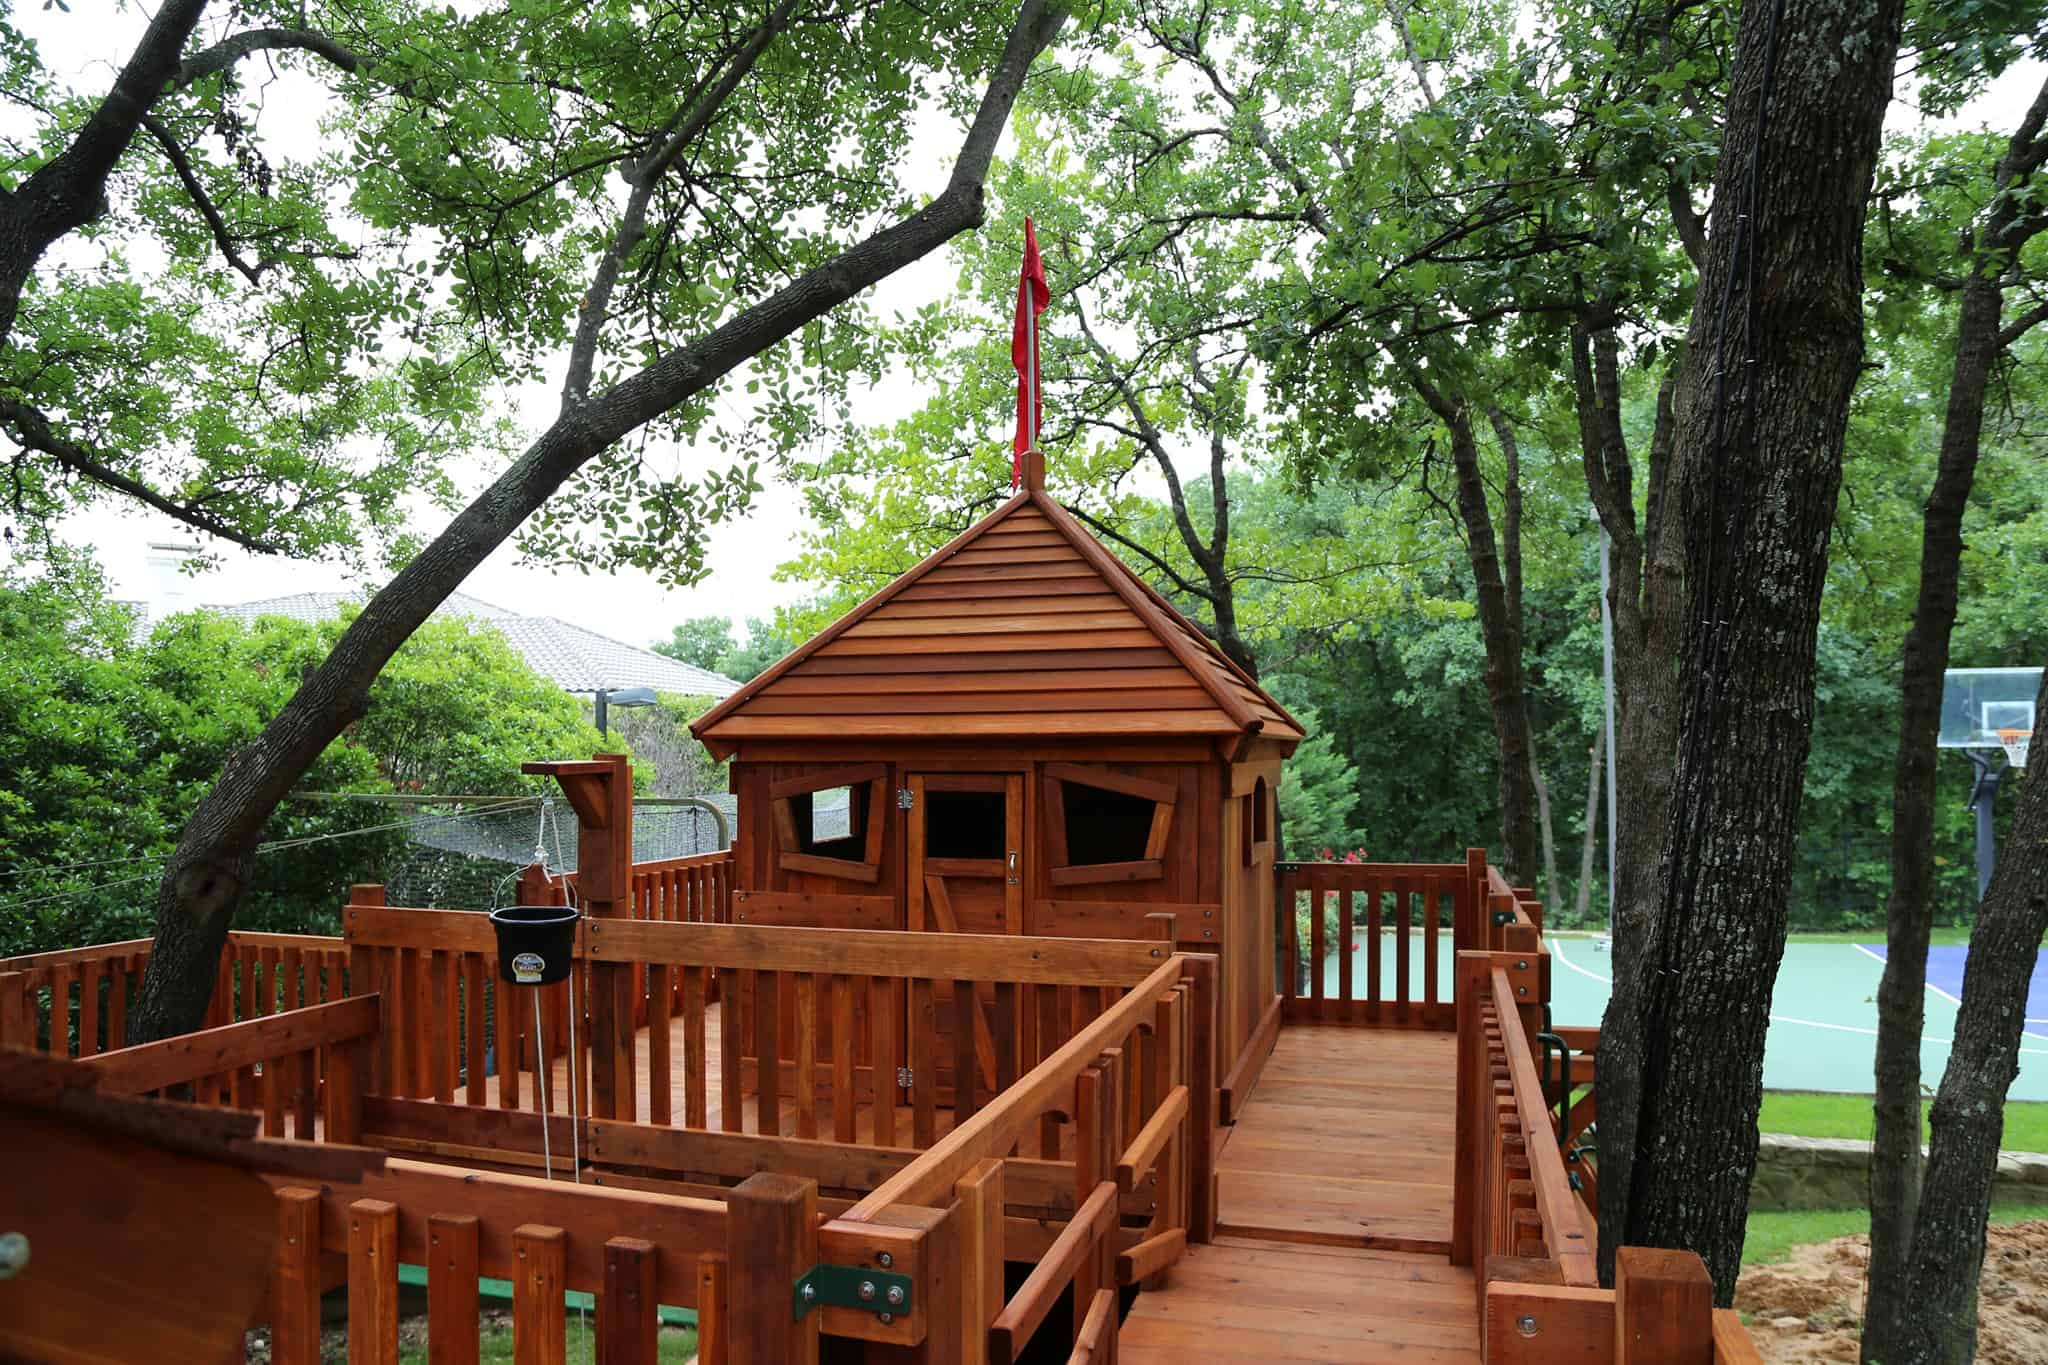 redwood bridged playset with princess roof cabin